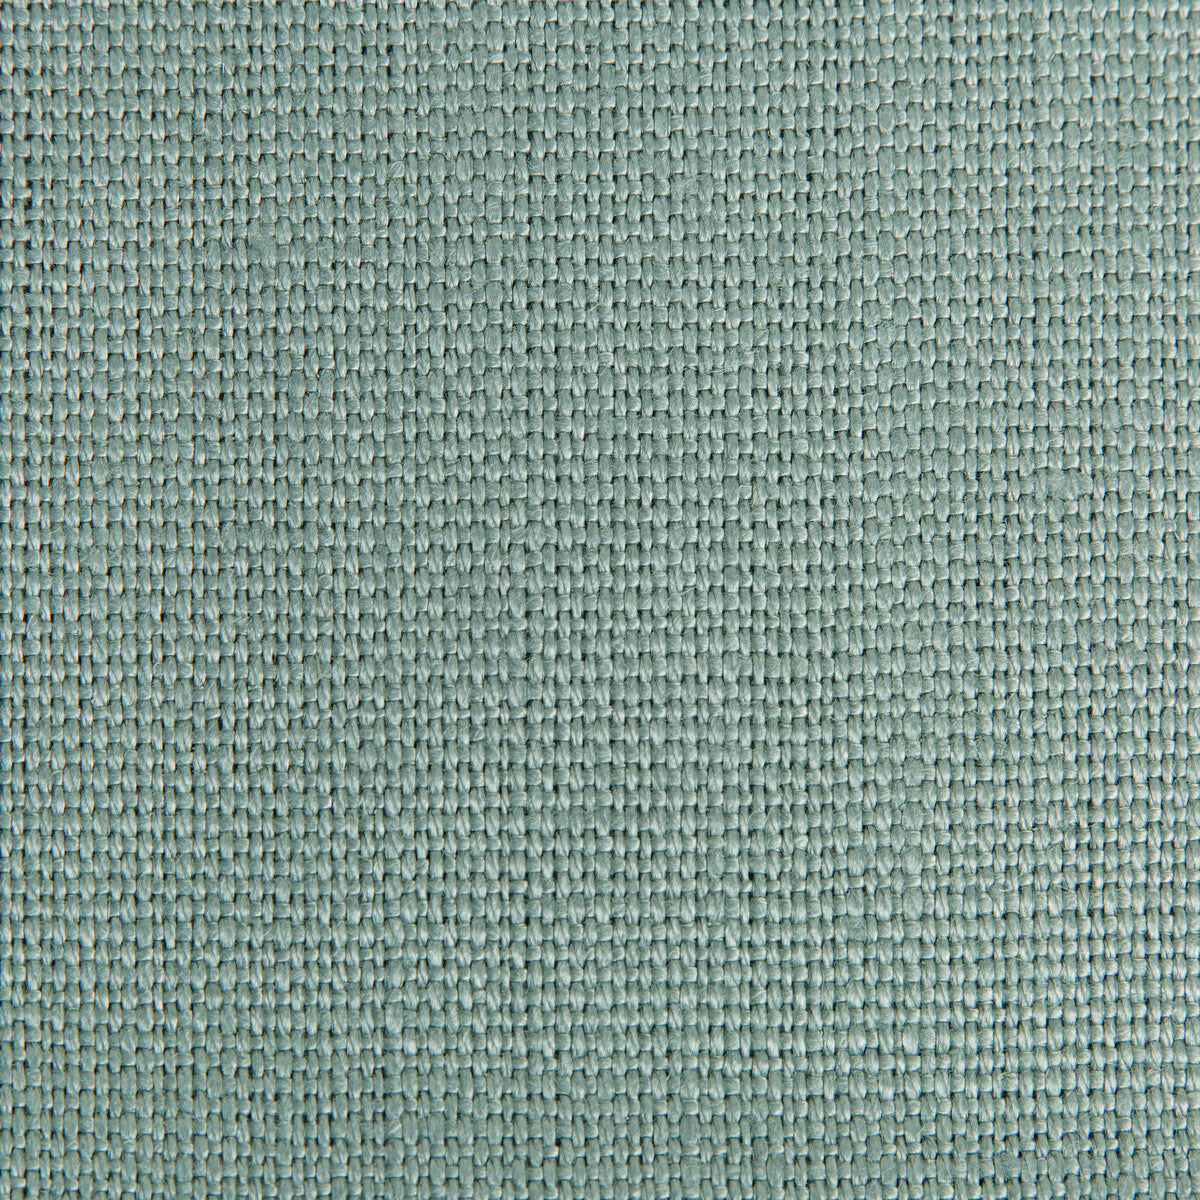 Stone Harbor fabric in mineral color - pattern 27591.13.0 - by Kravet Basics